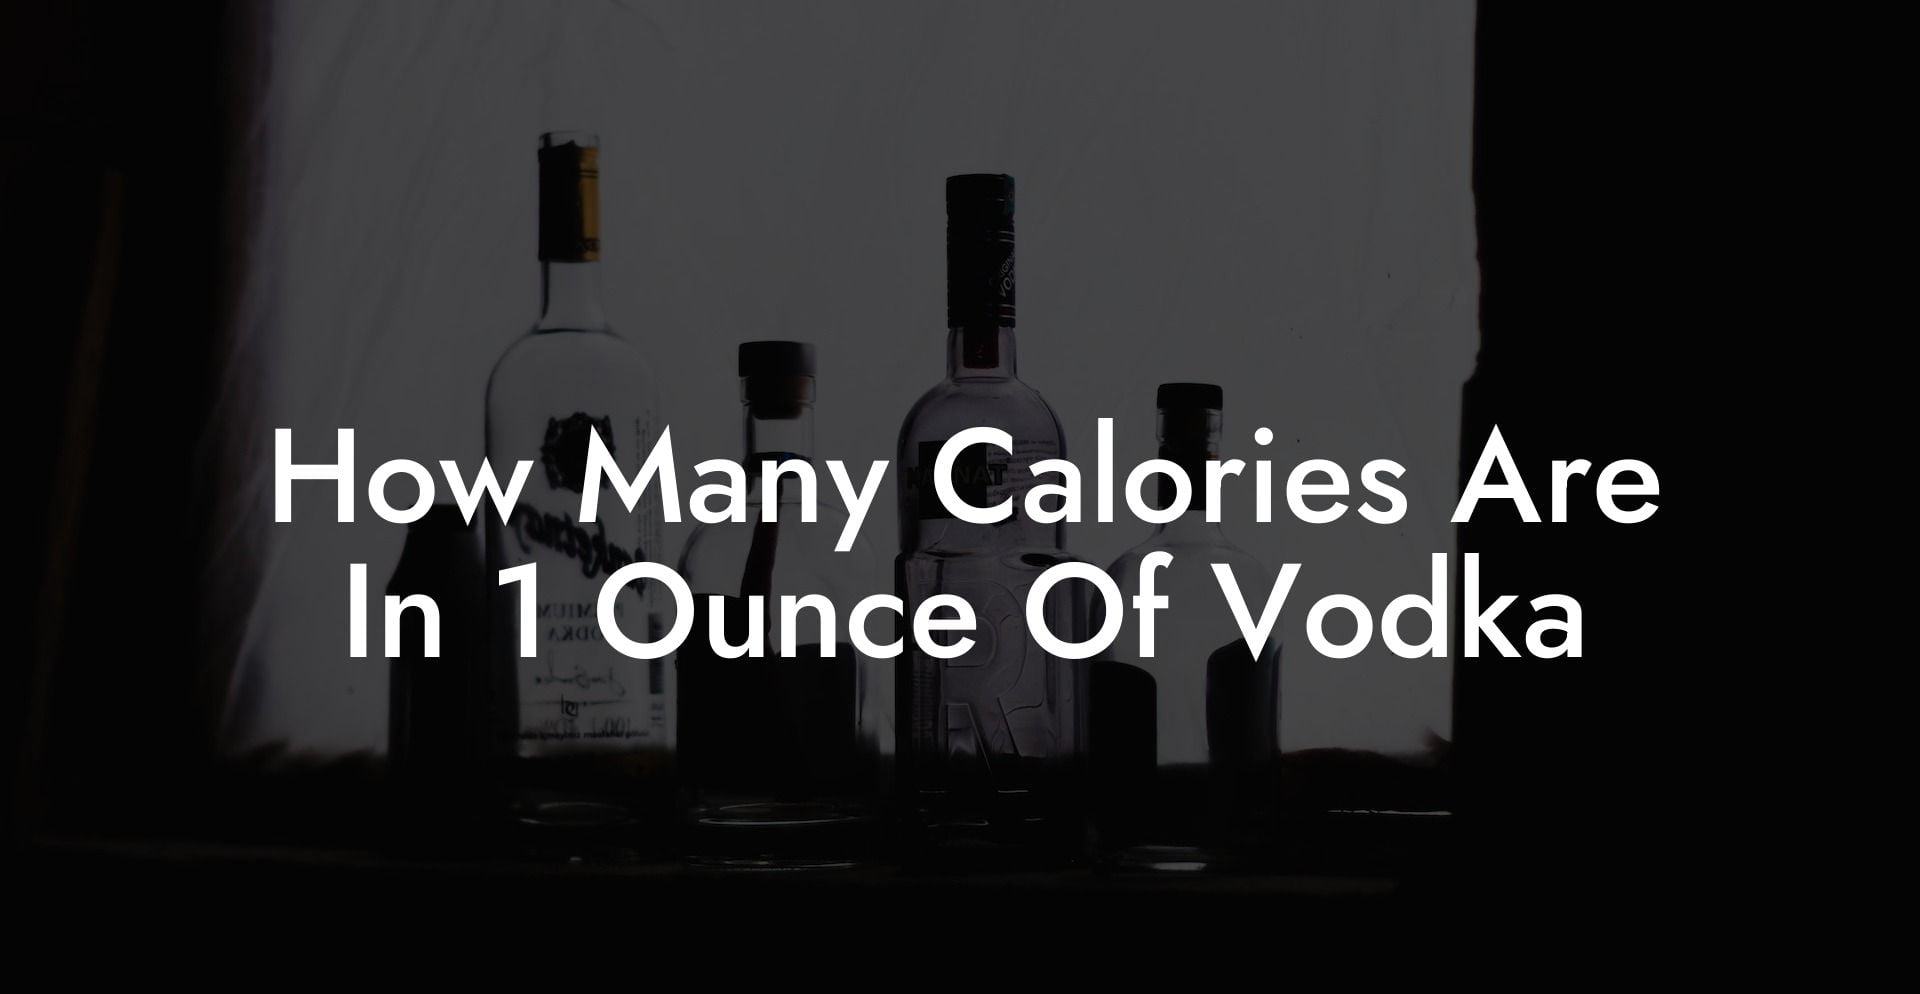 How Many Calories Are In 1 Ounce Of Vodka